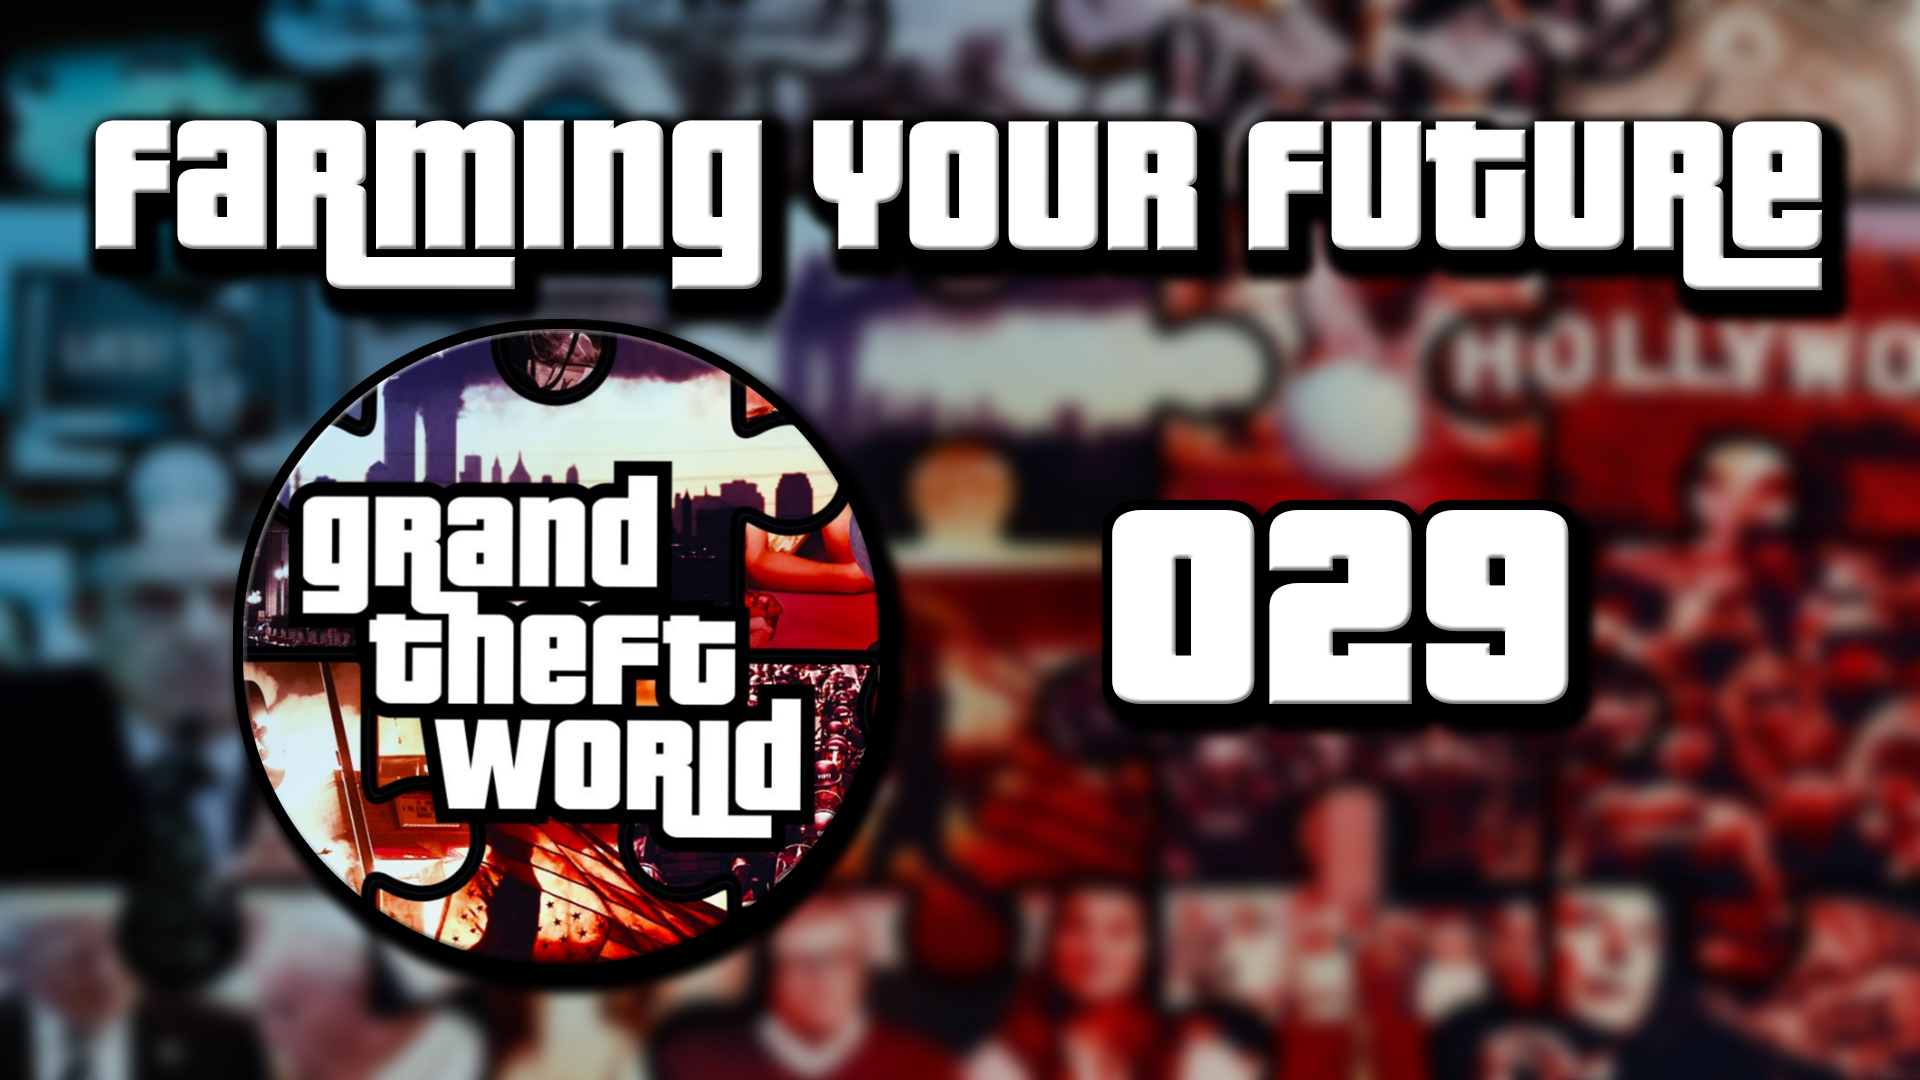 Grand Theft World Podcast 029 | Farming Your Future